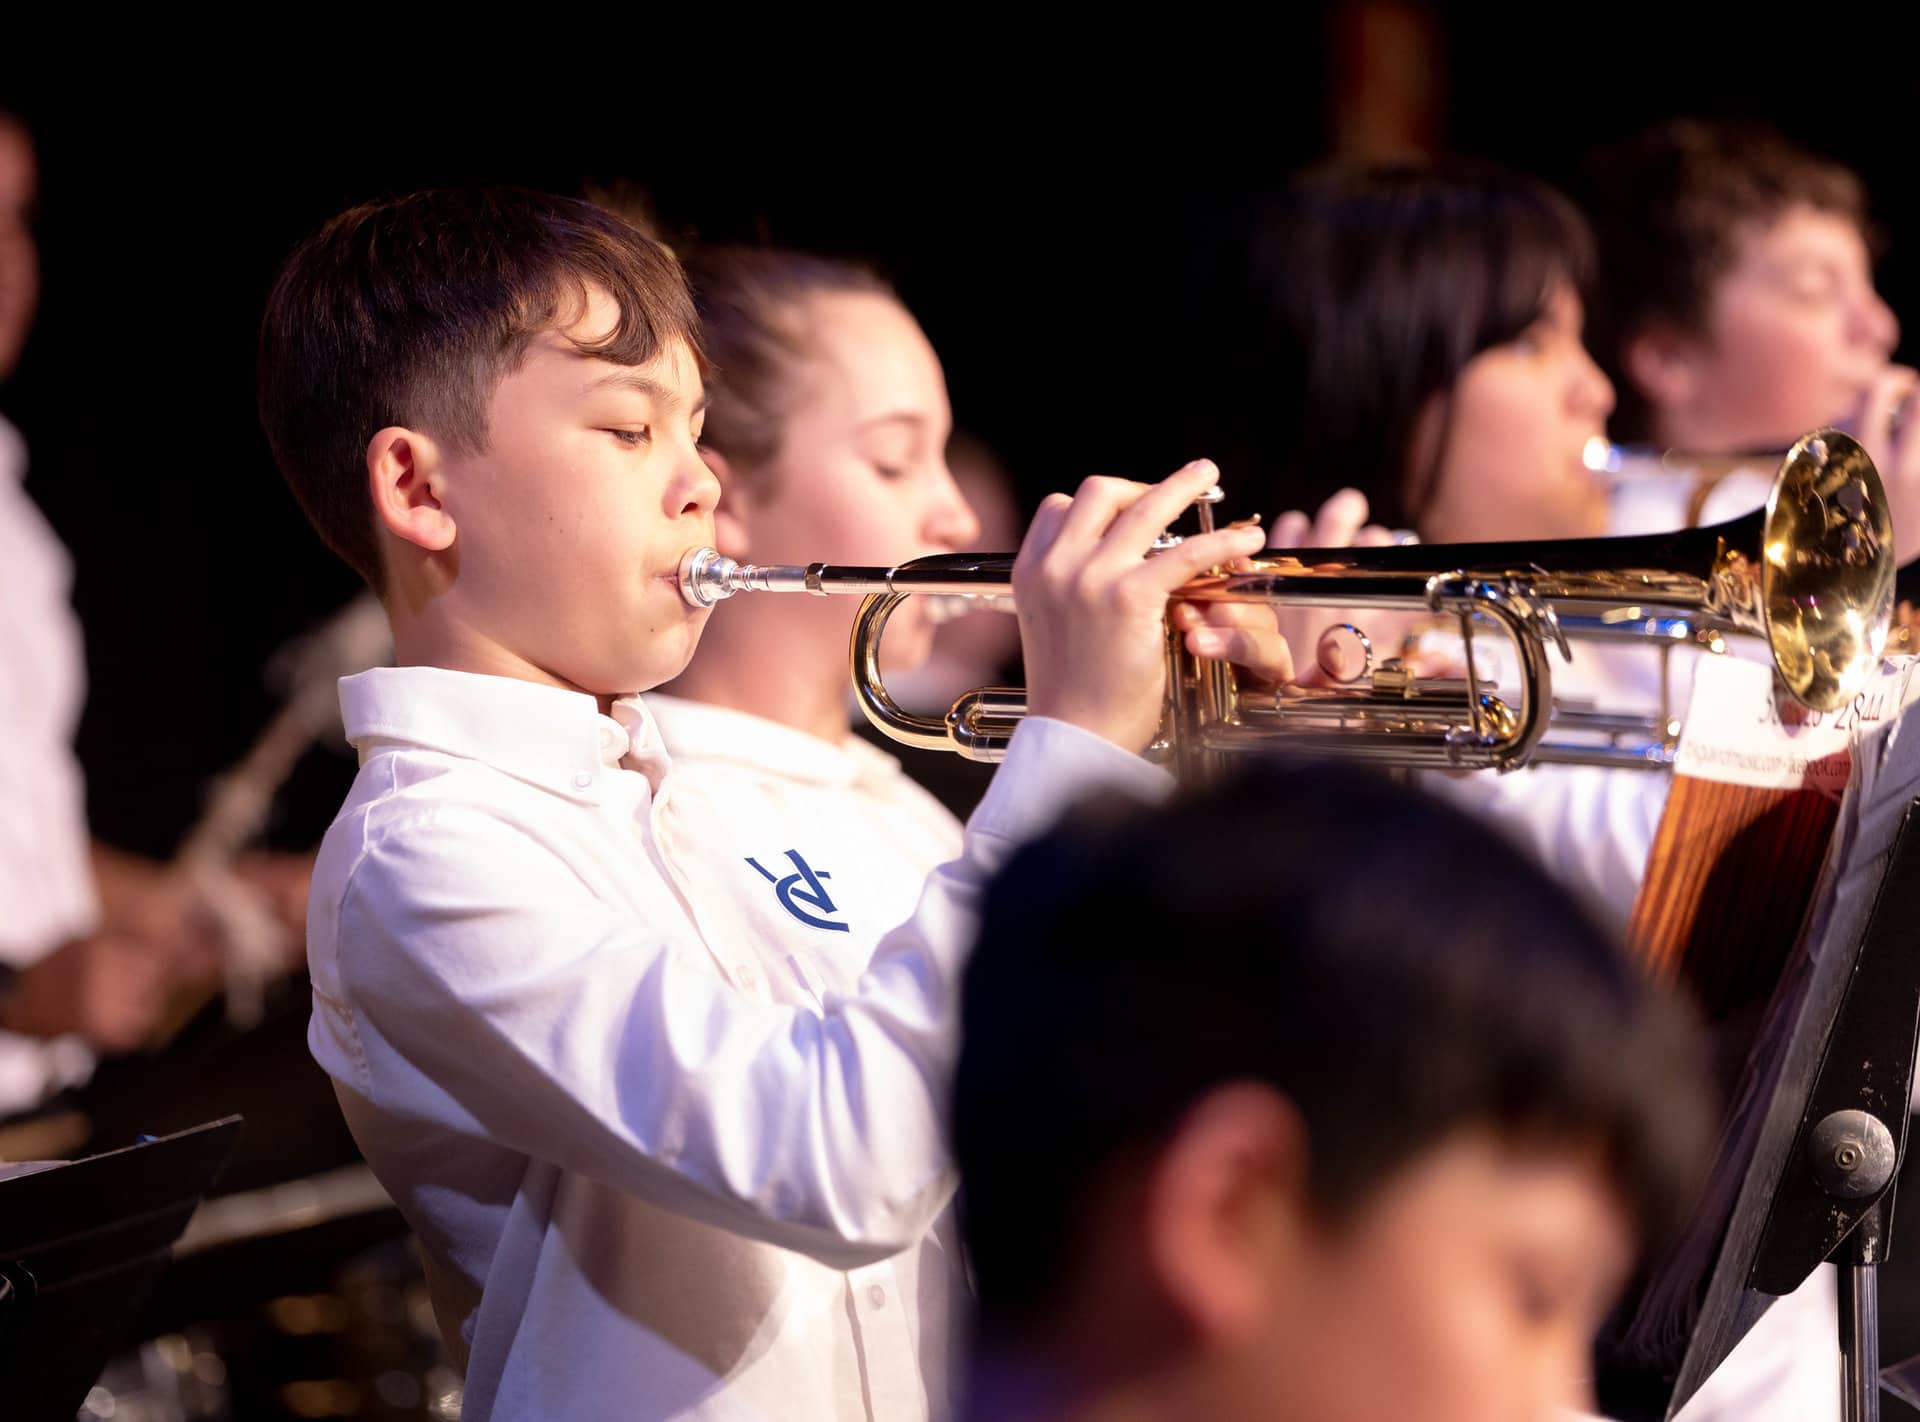 MS student playing trumpet